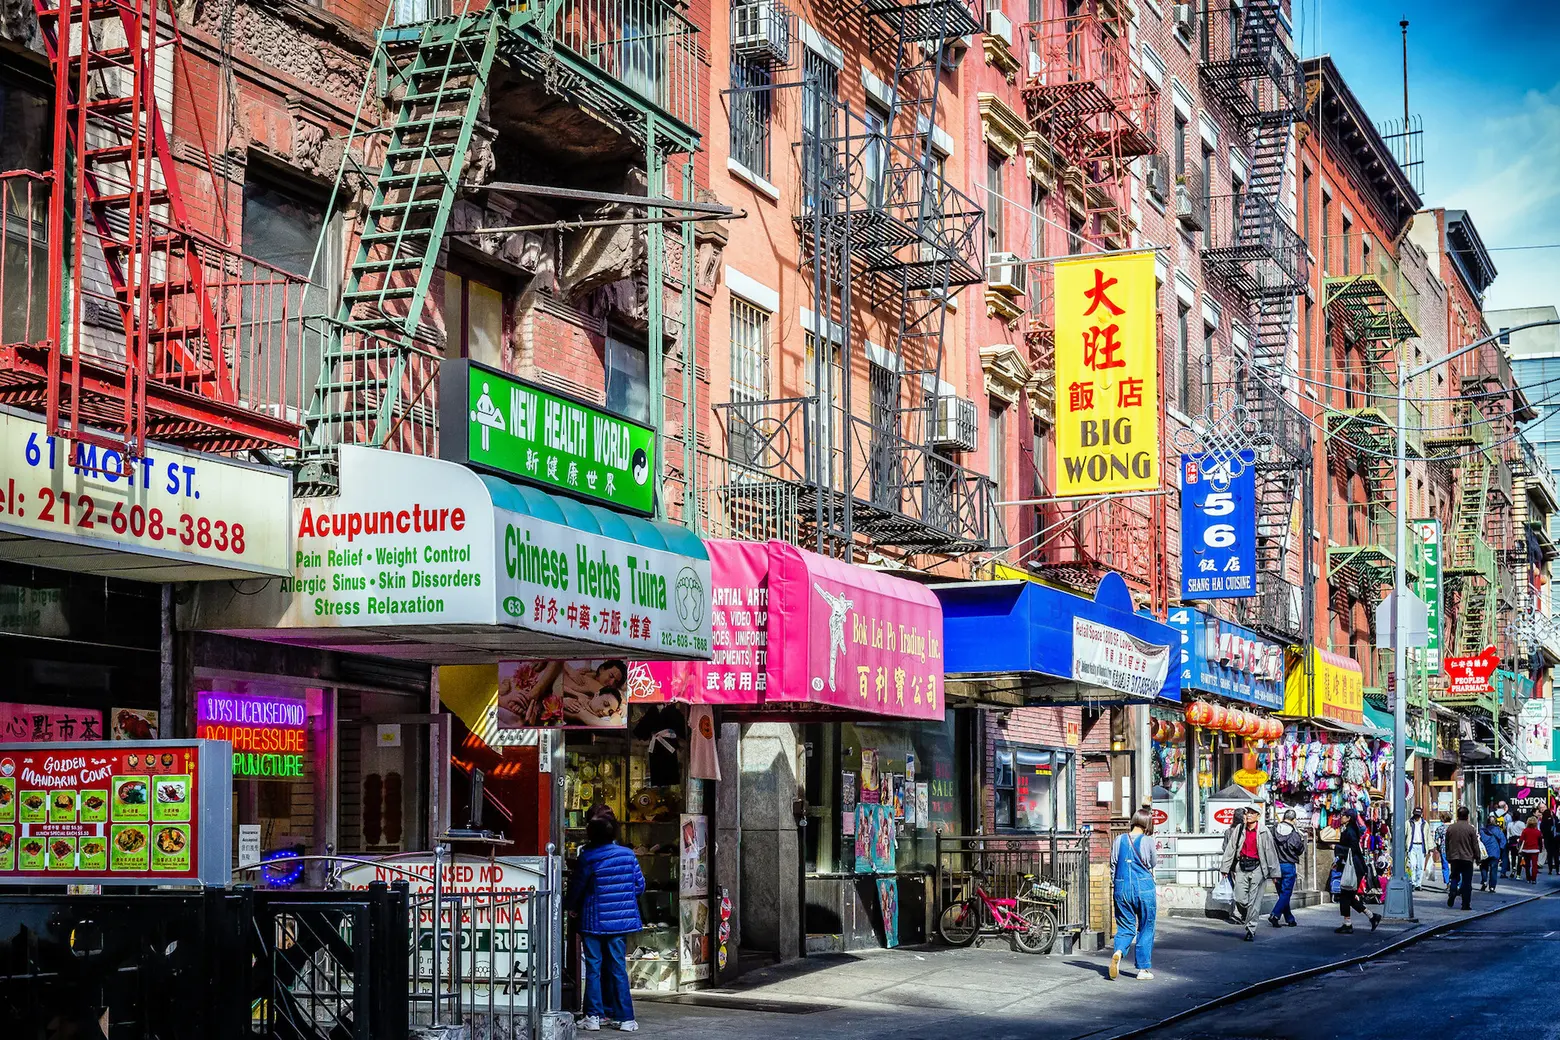 10 Great Holiday Gifts from New York's Chinatown